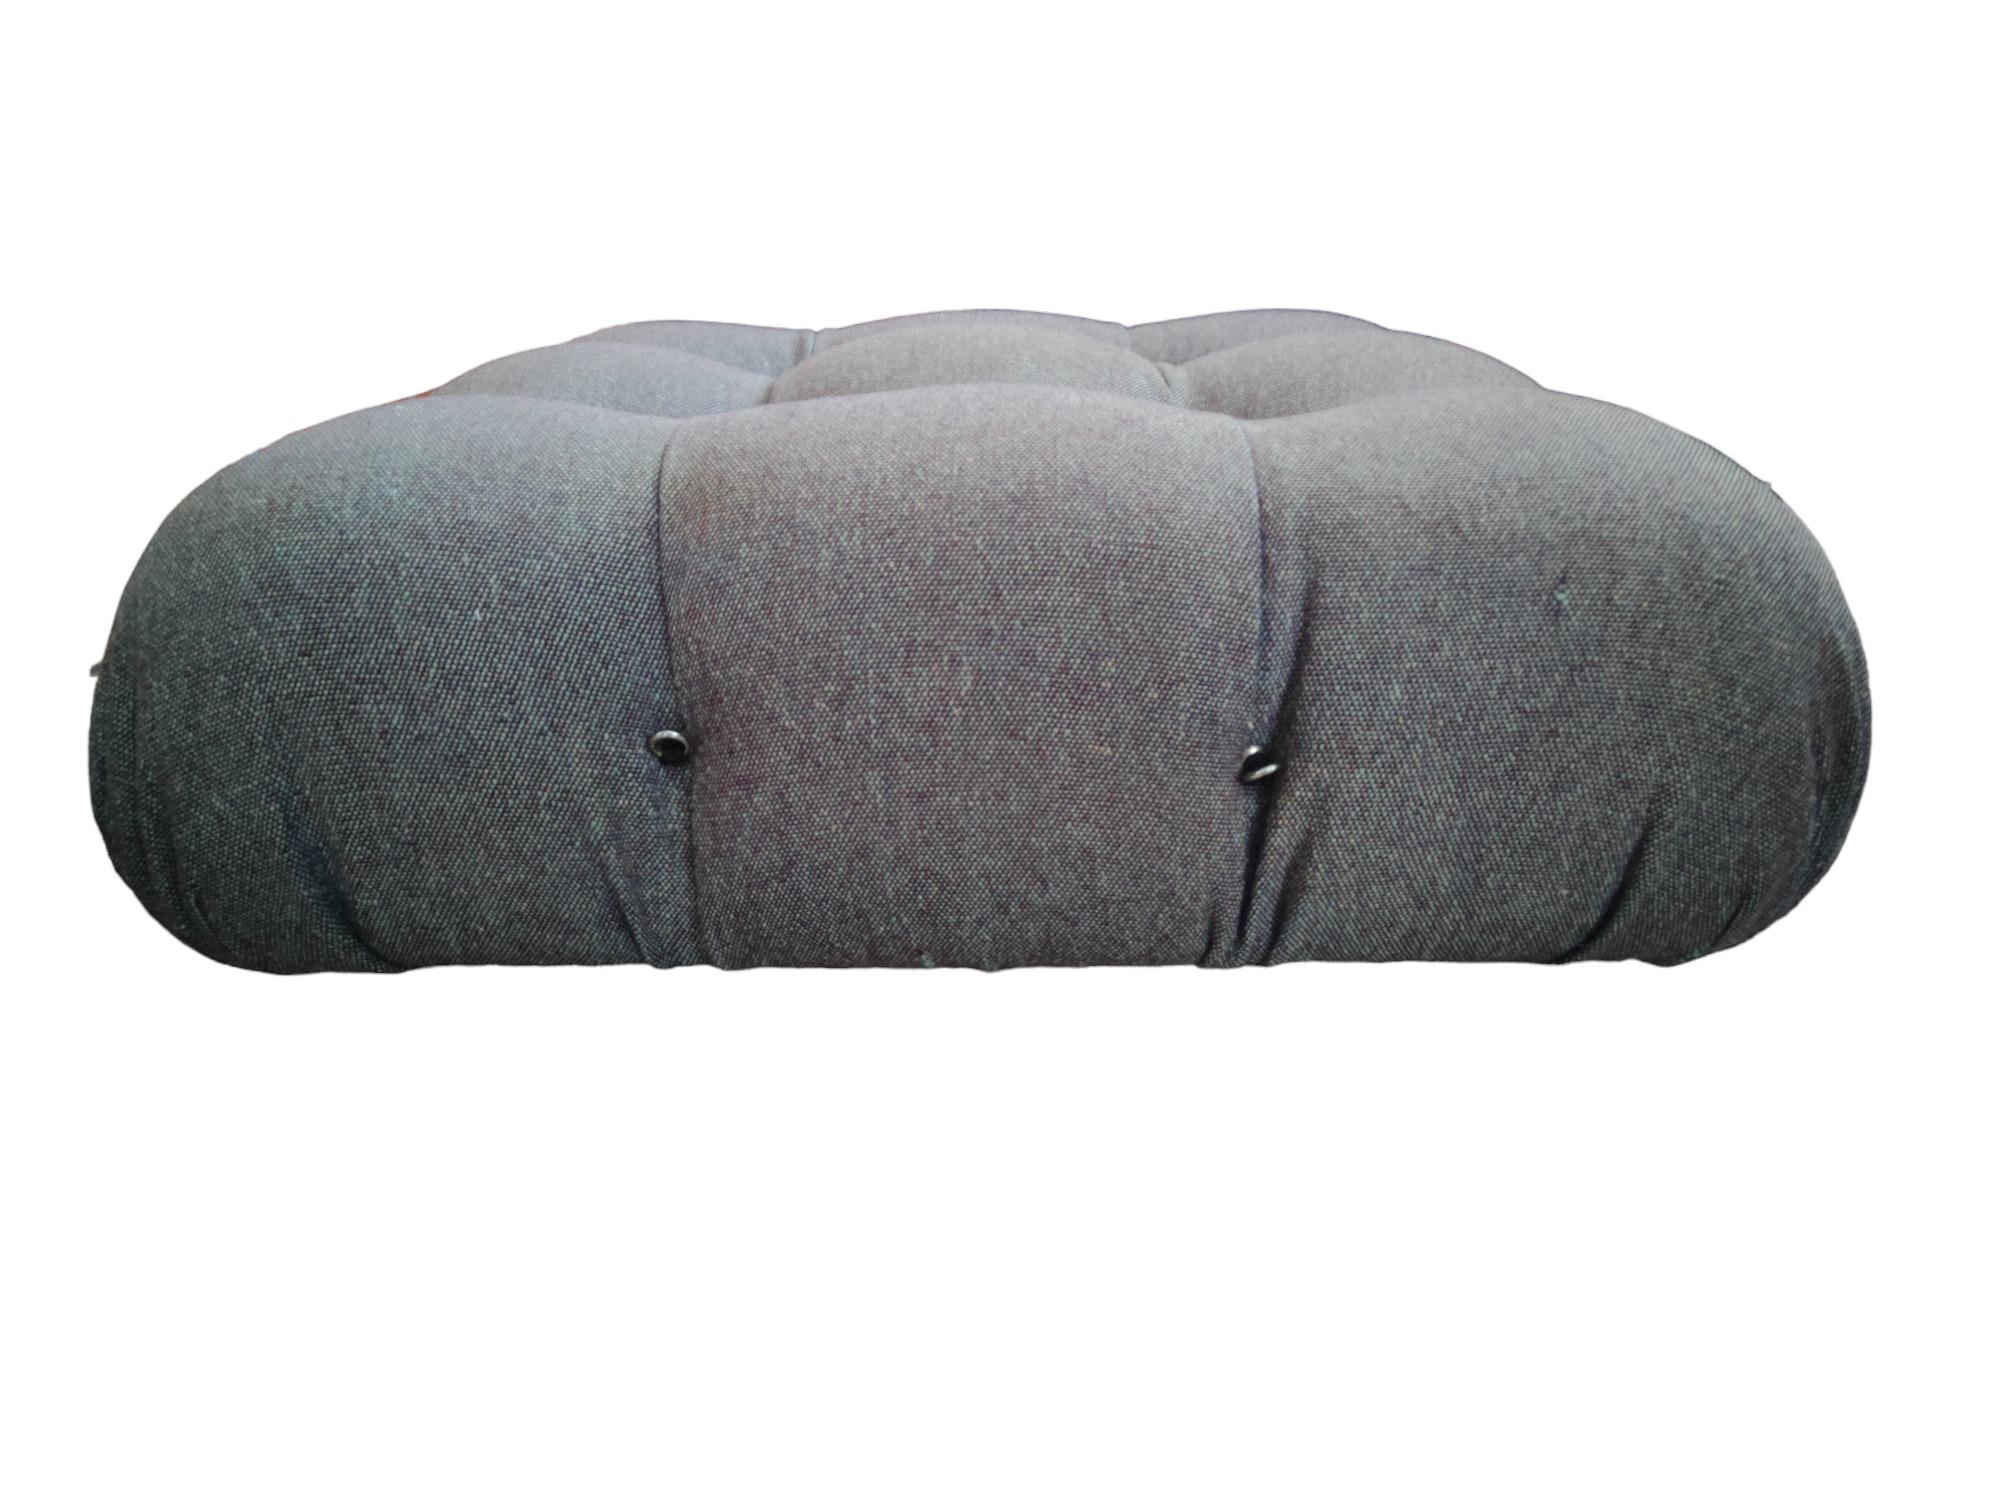 rare pouf model Camaleonda, designed by Mario Bellini for C&B Italia (B&B's first name, thus older and rarer), made and preserved in its original gray melange fabric.
Measures 96 x 96 cm, height 40 cm, in very good overall condition, with obvious